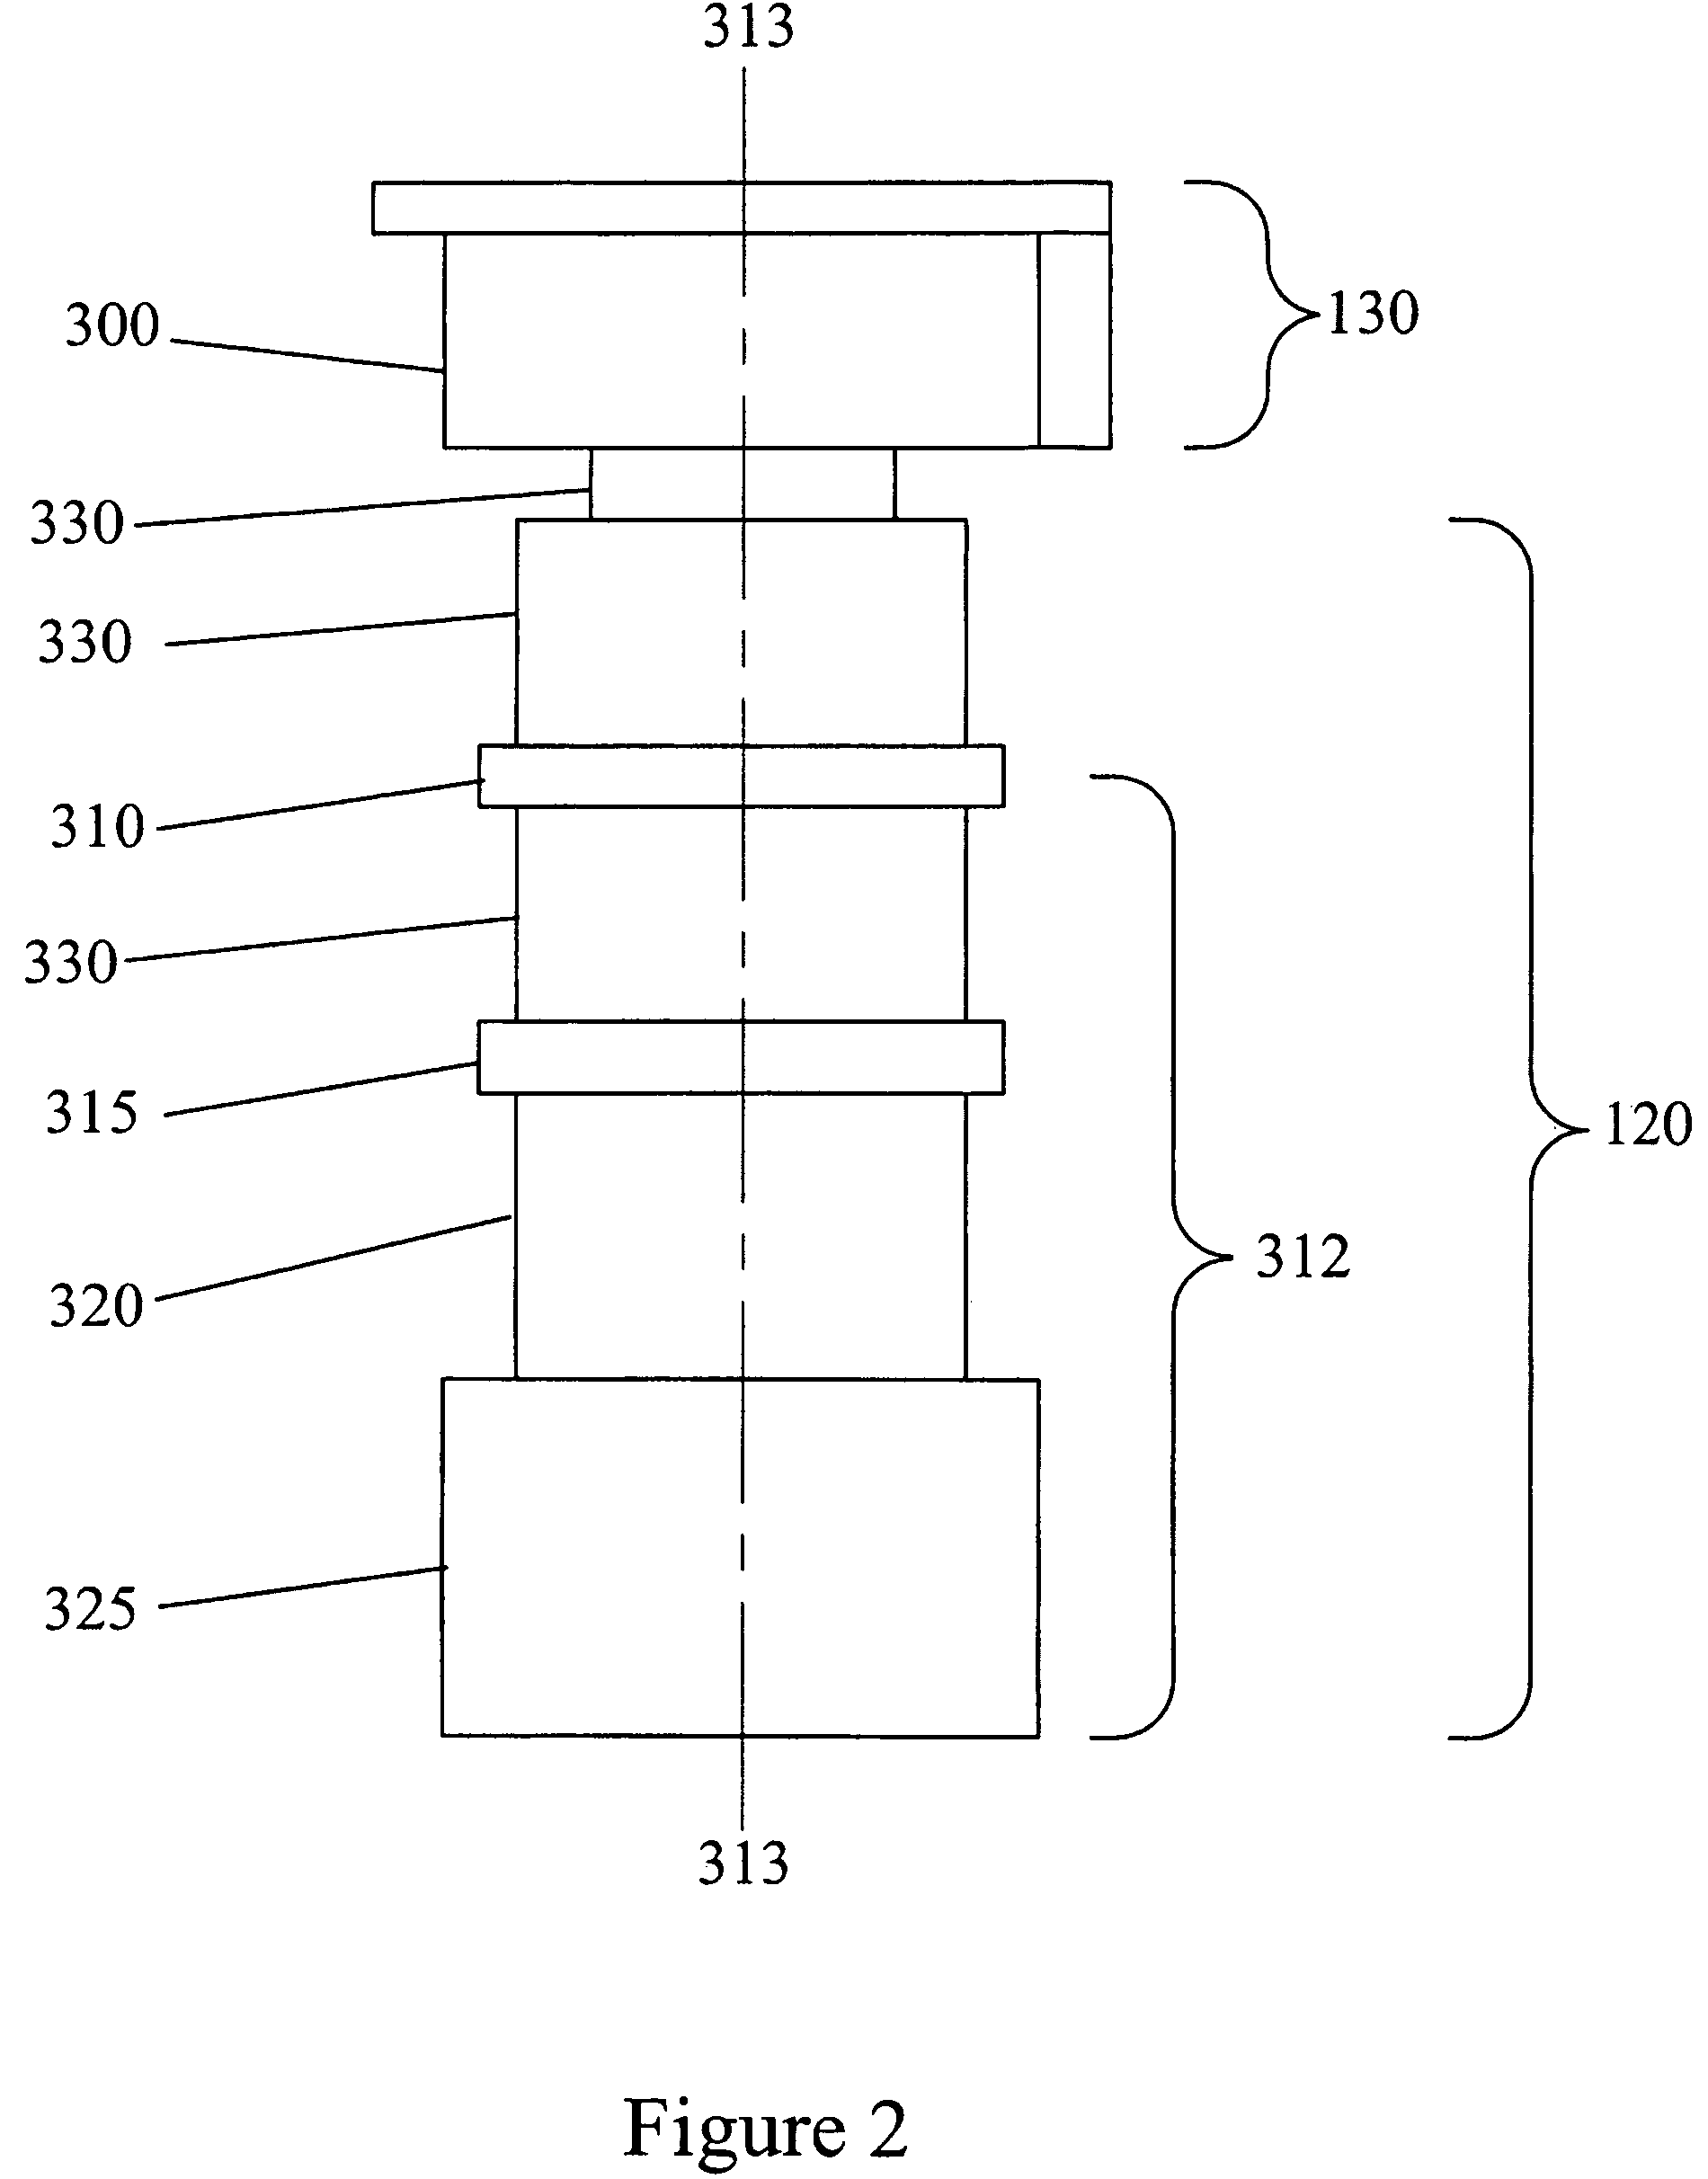 Monitoring and control system for blood processing